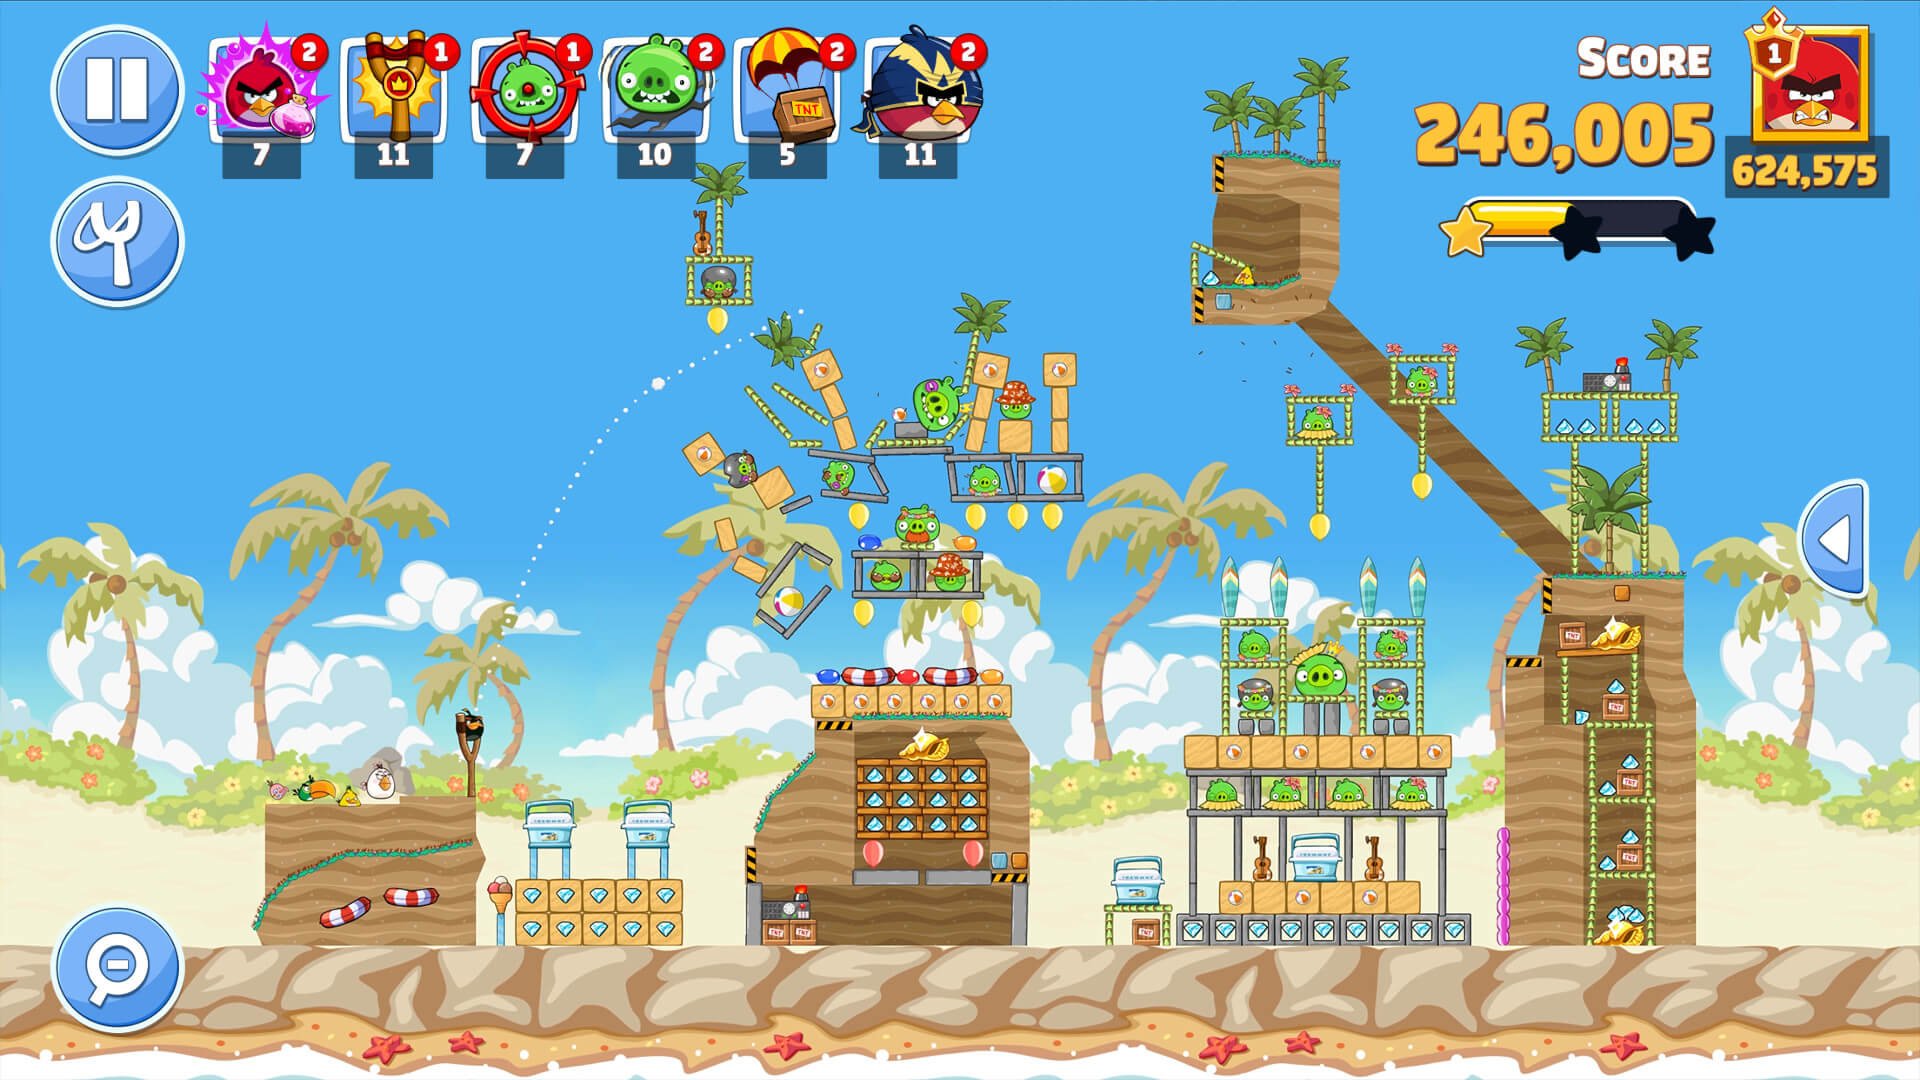 Angry Birds Friends, a Rovio mobile game